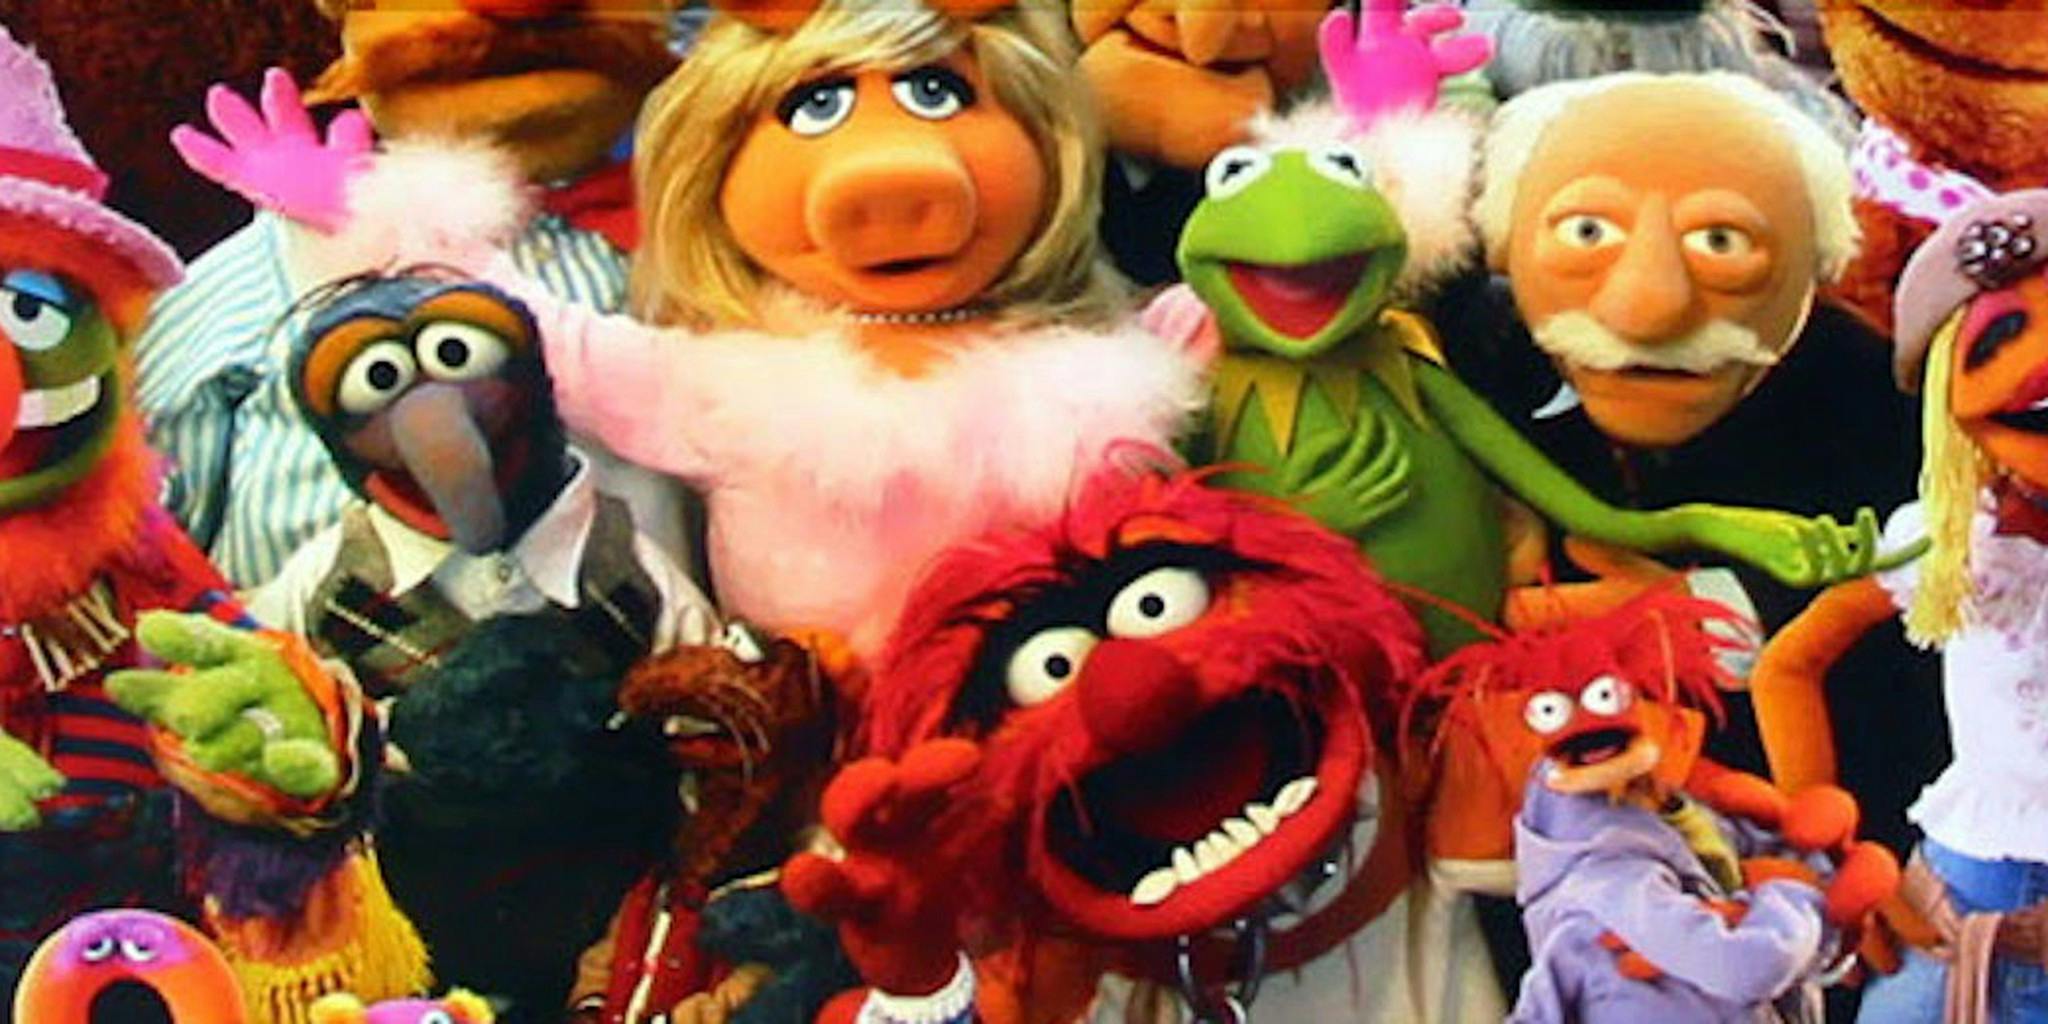 The 15 best moments from the original 'Muppet Show